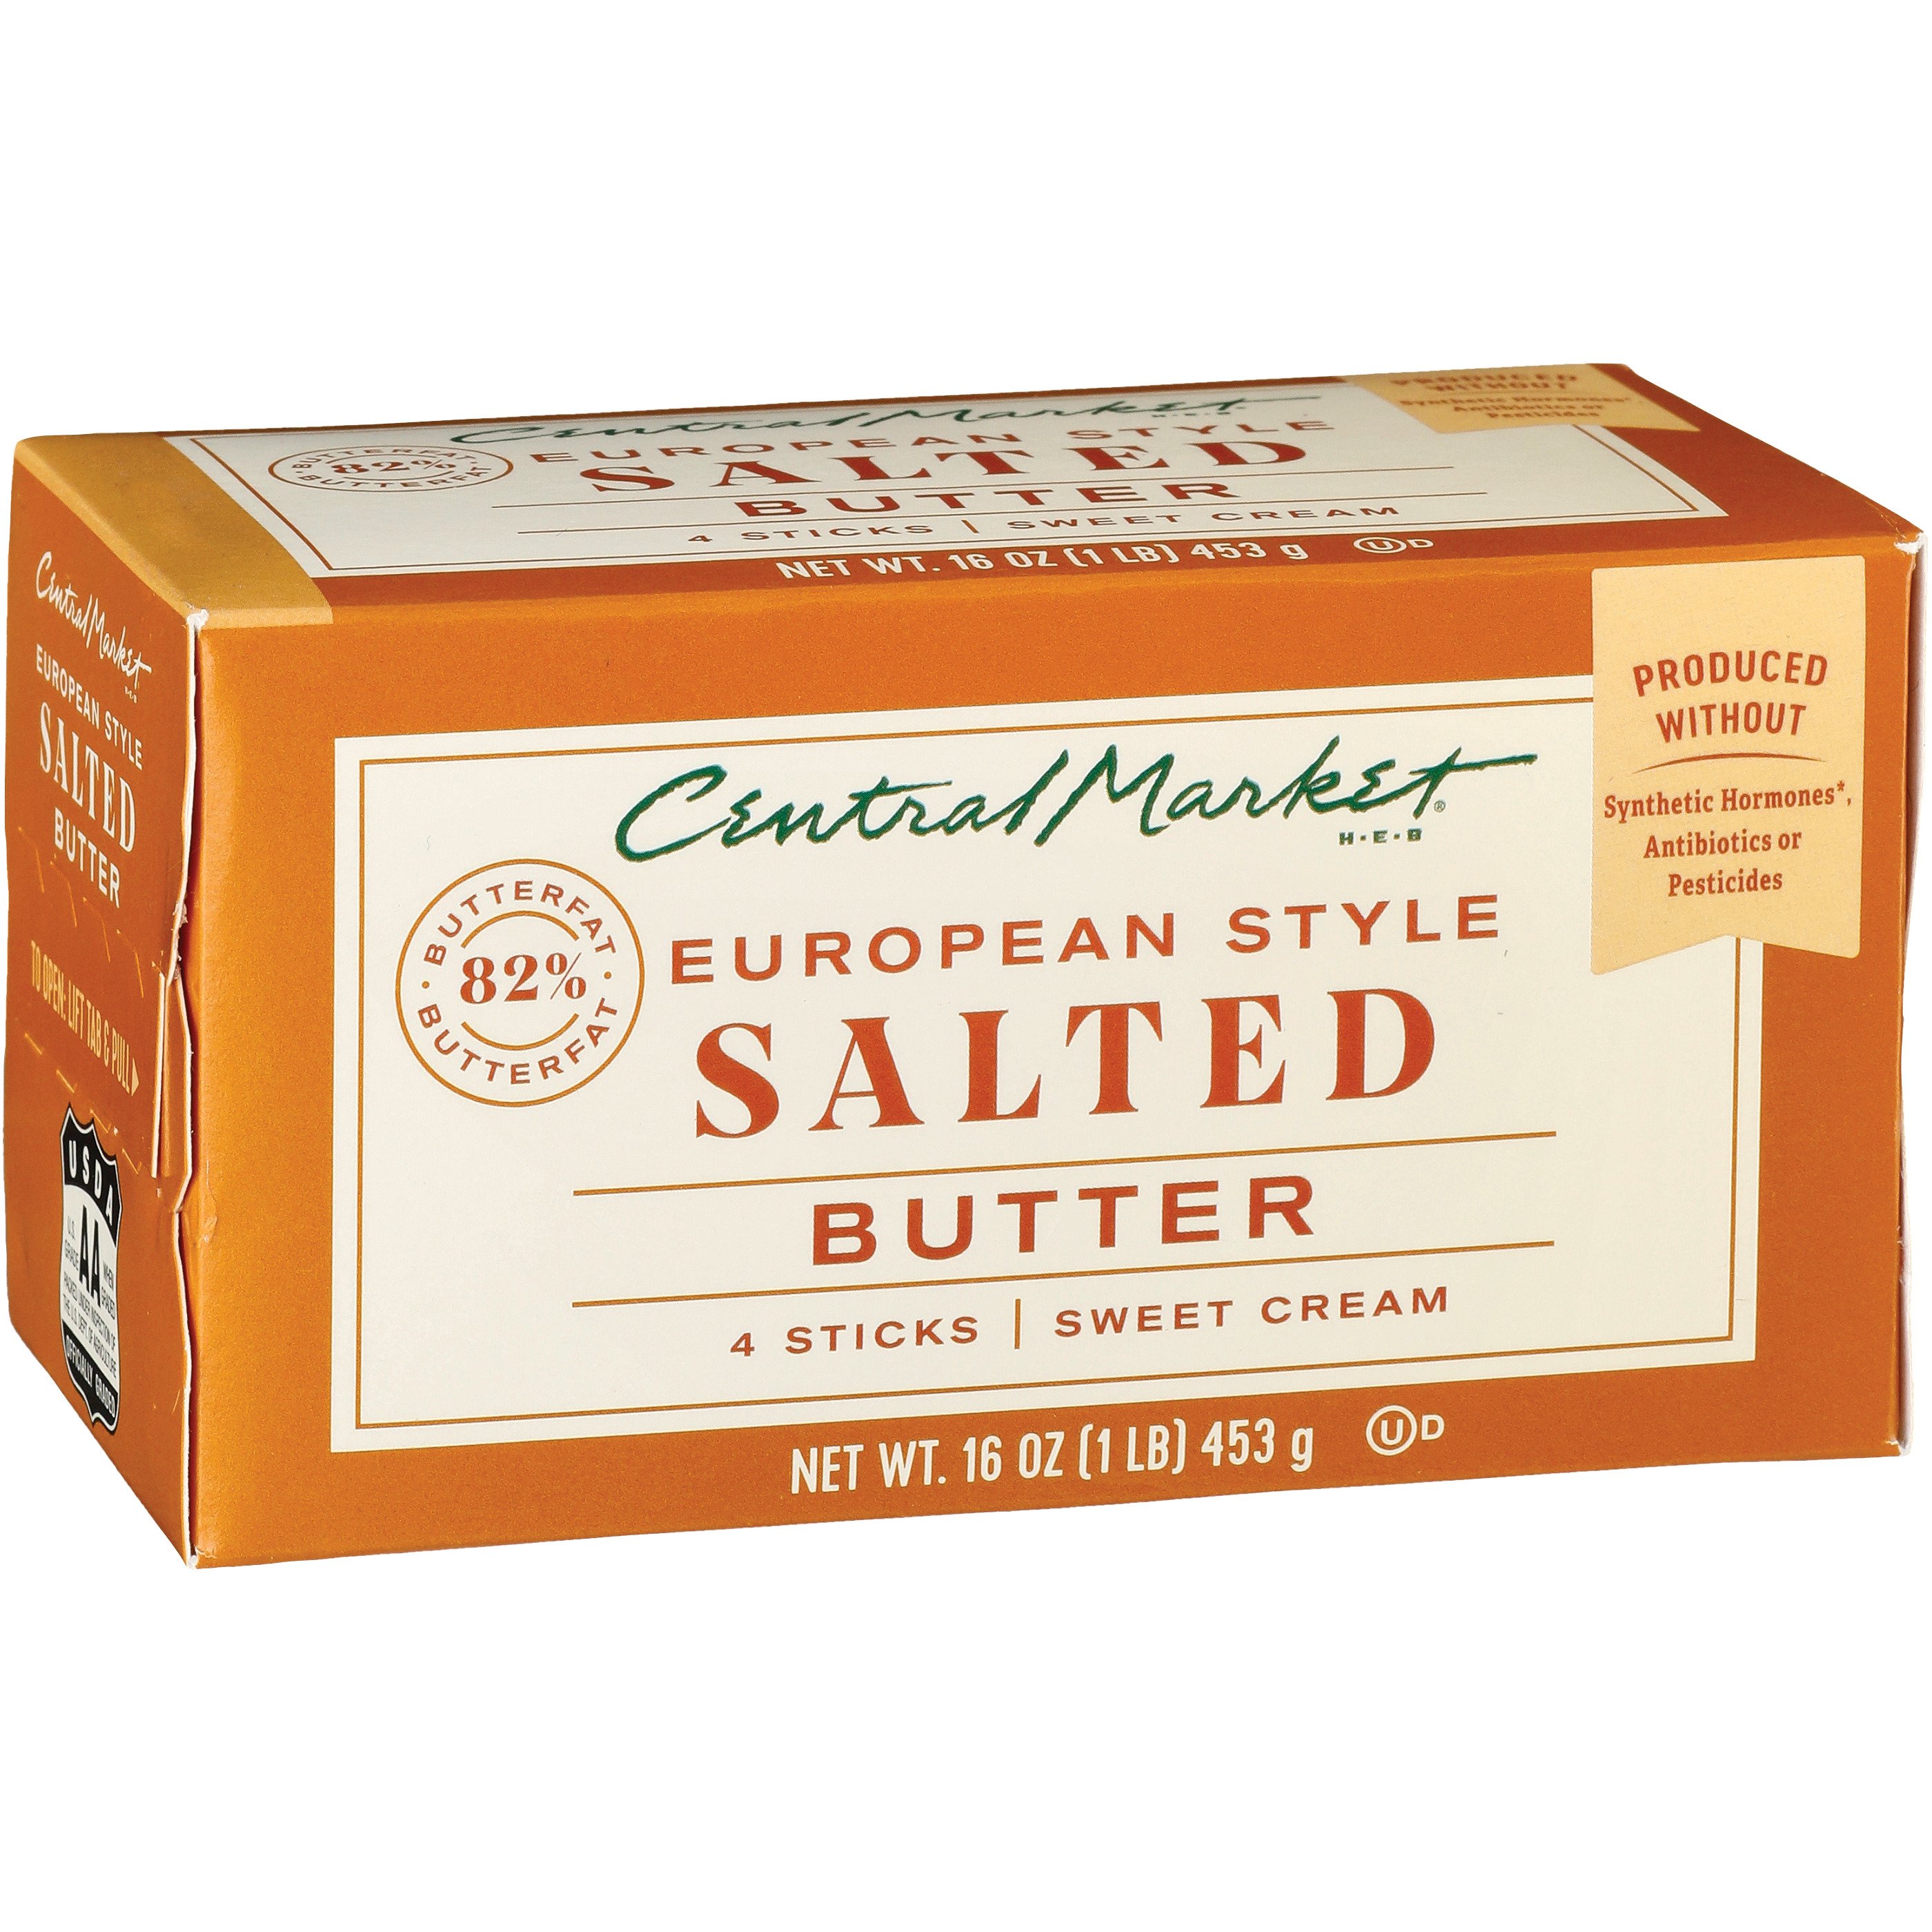  Kerrygold Pure Irish Butter, Salted, 32 oz (Four, 8 oz